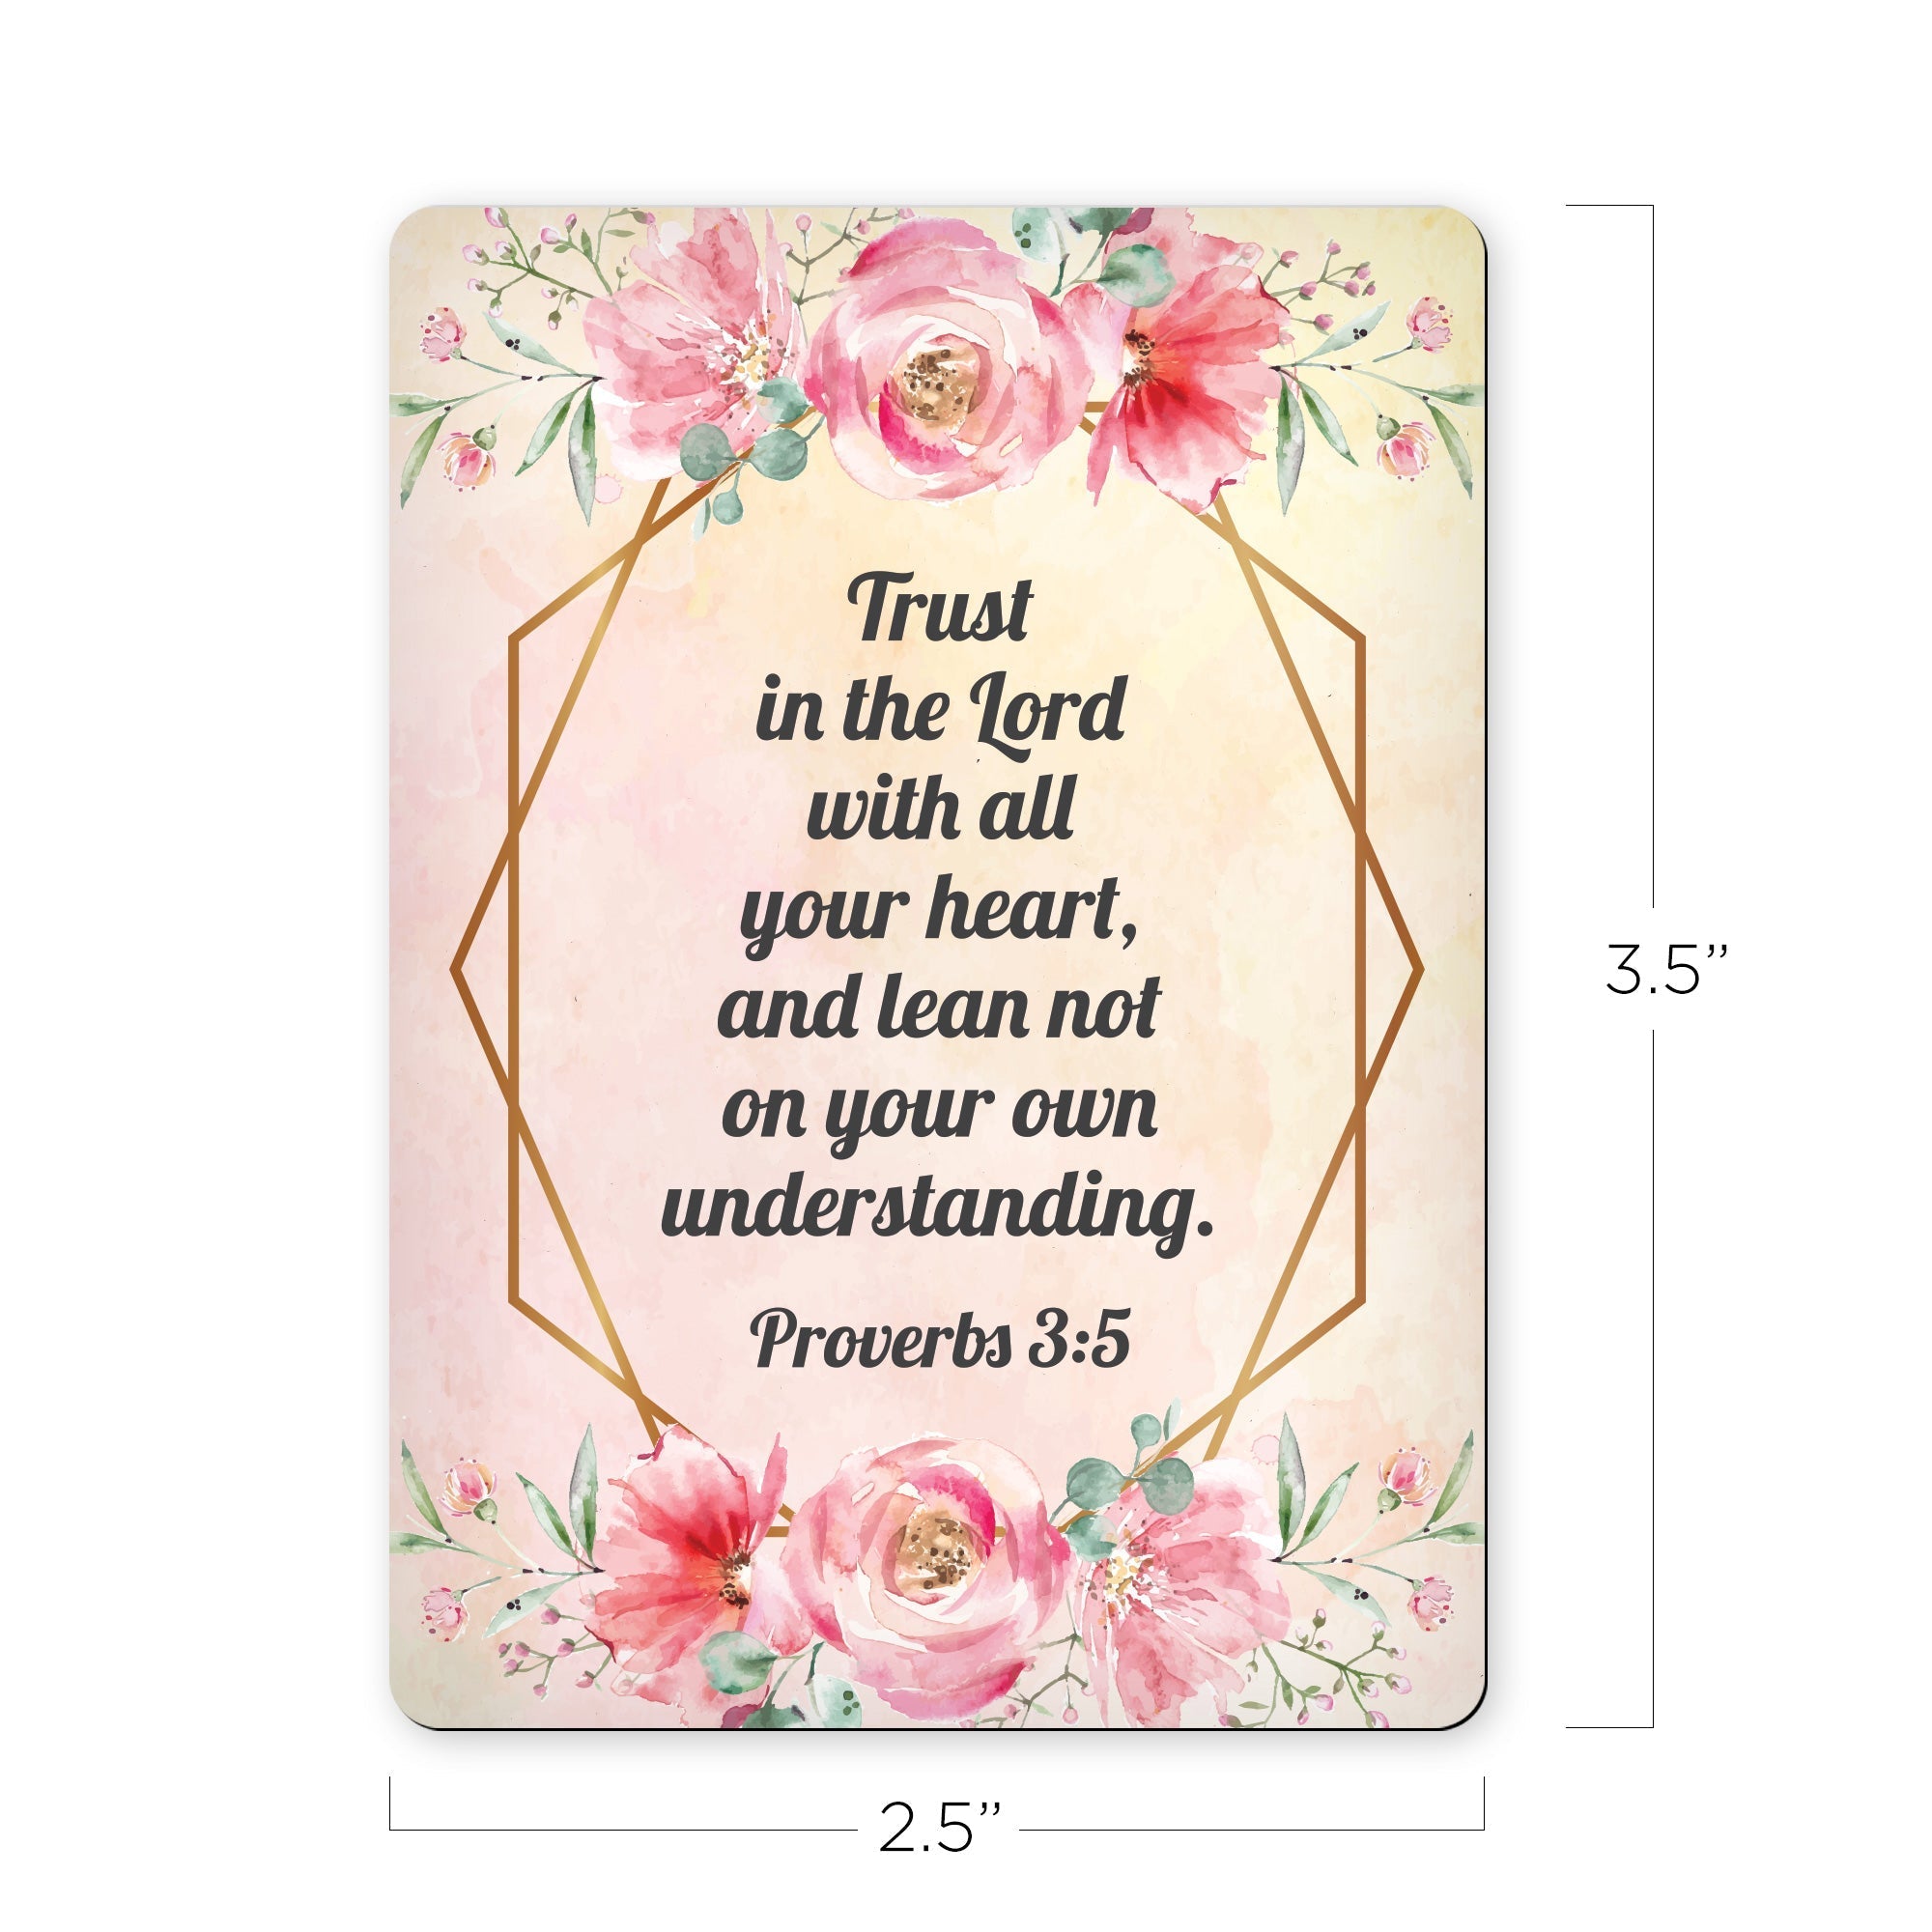 Trust in the Lord with all your Heart - Proverbs 3:5 (Pink) - Scripture Magnet